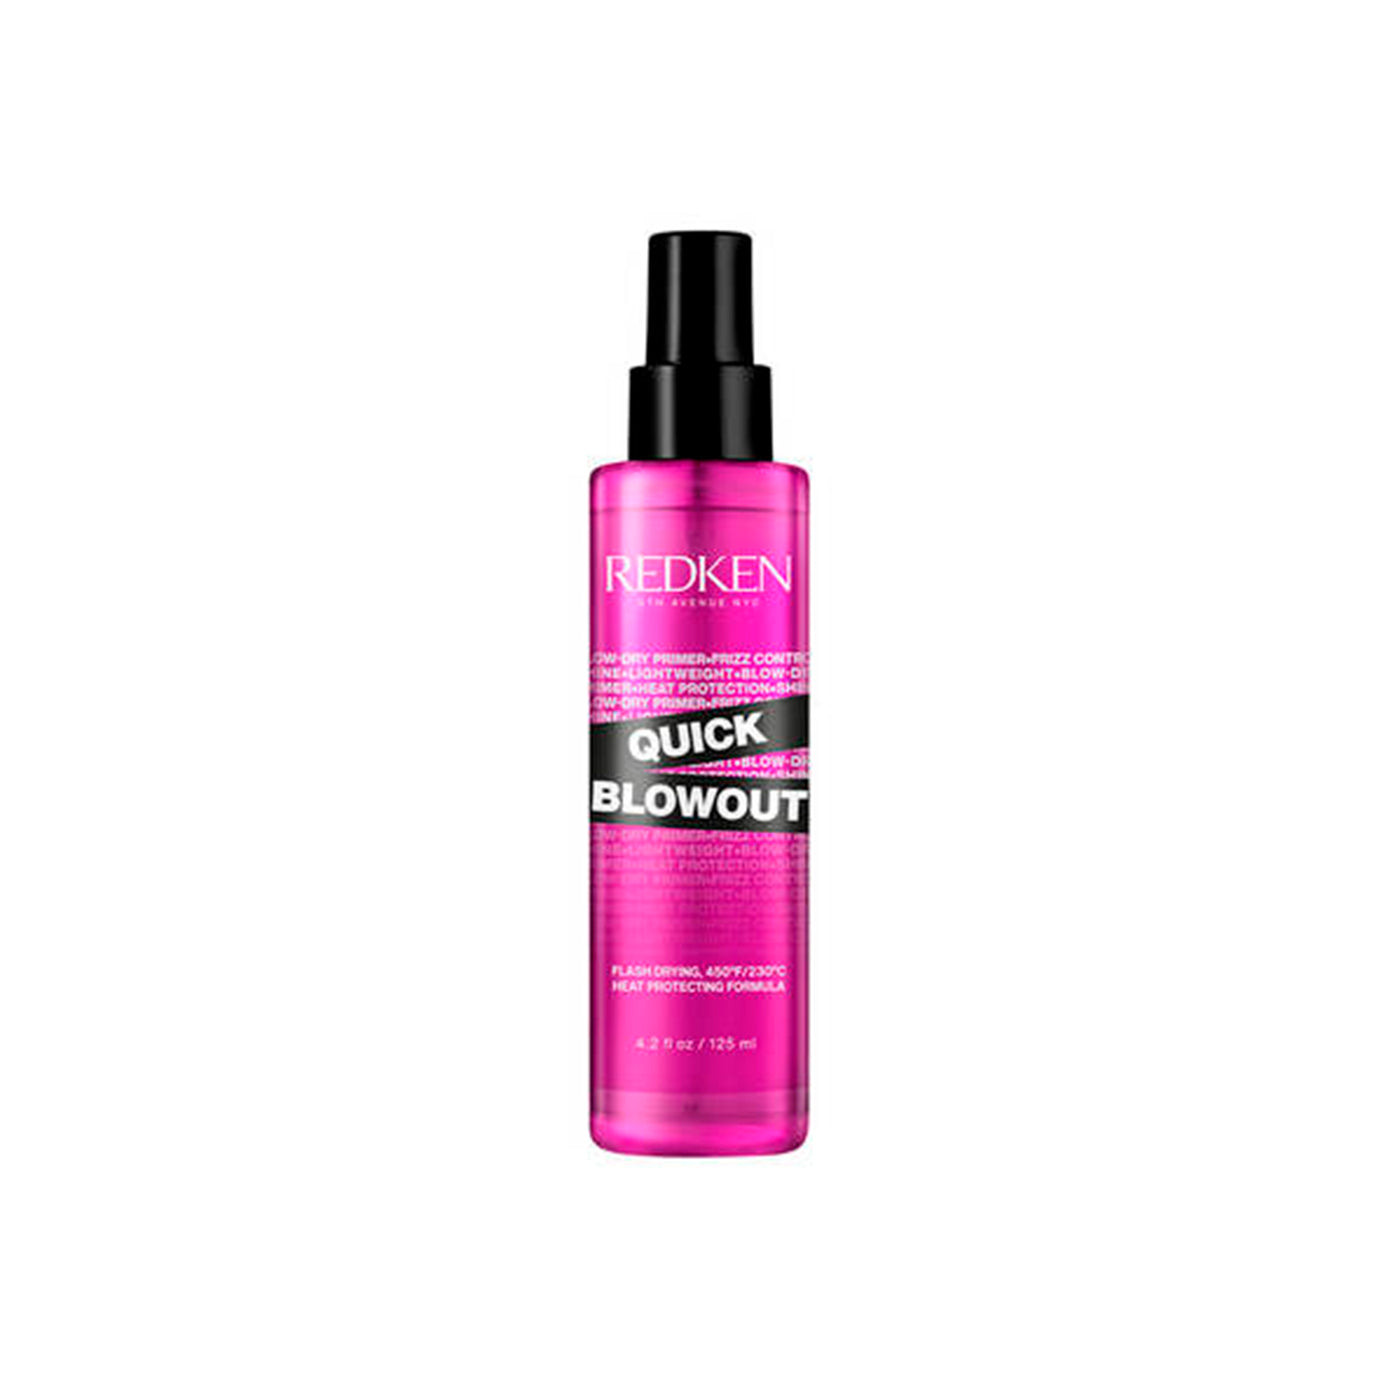 Redken Best Professional Quick Blowout Heat Protecting Blowdry Spray